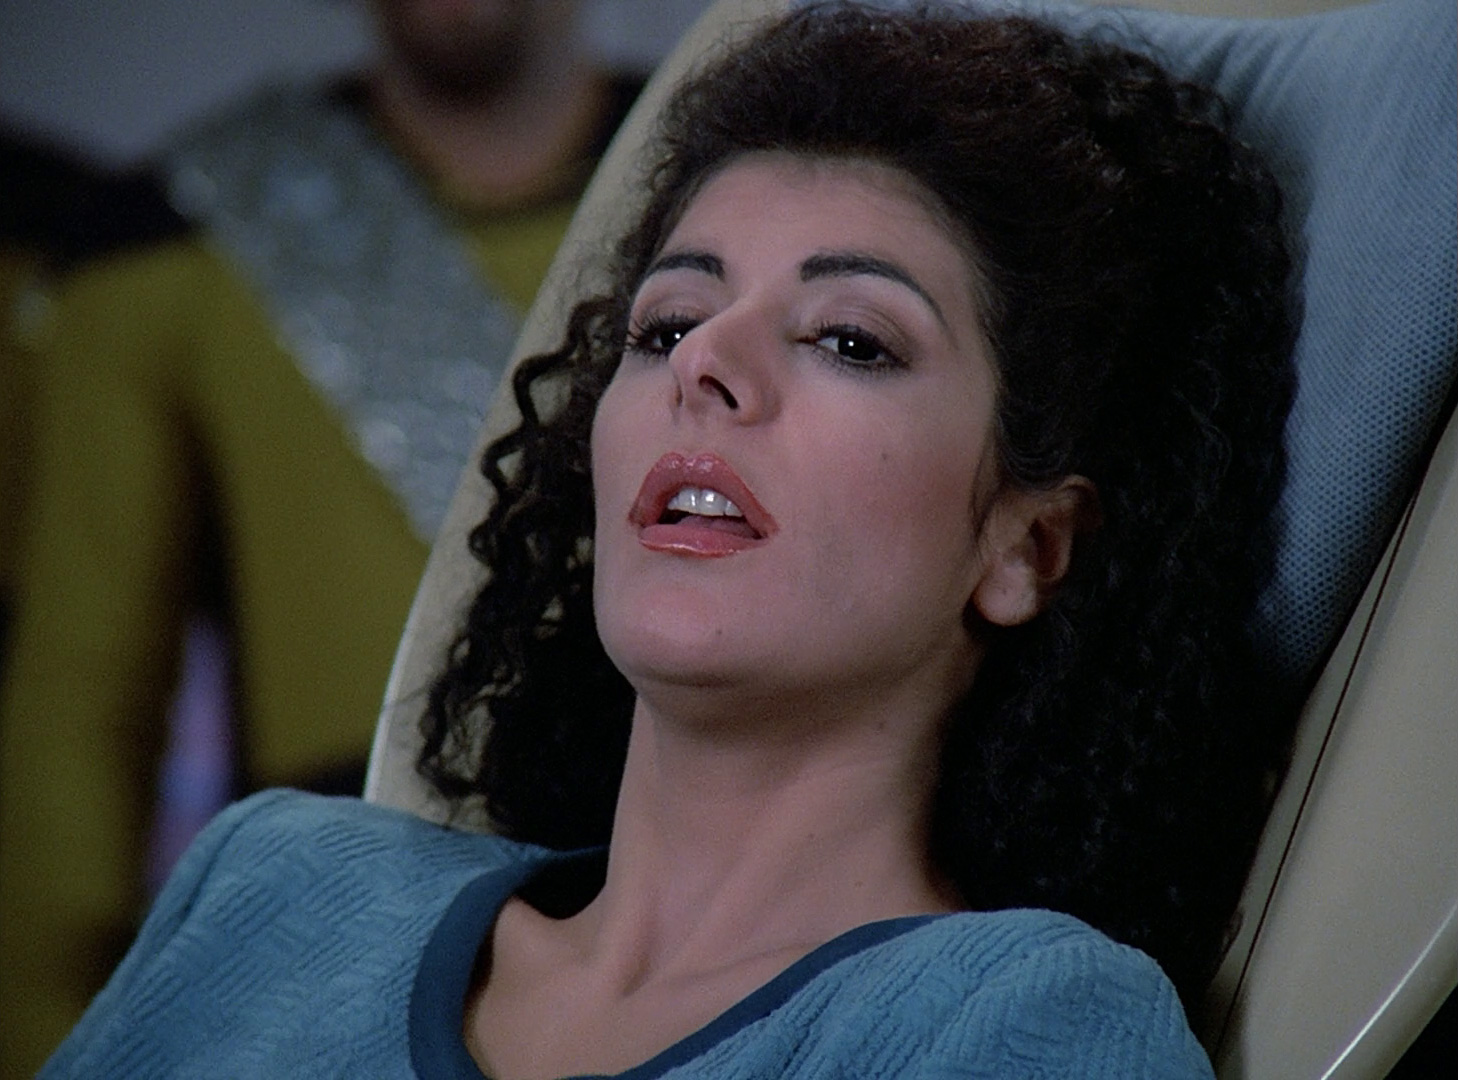 Troi in labour with Worf standing behind her bed